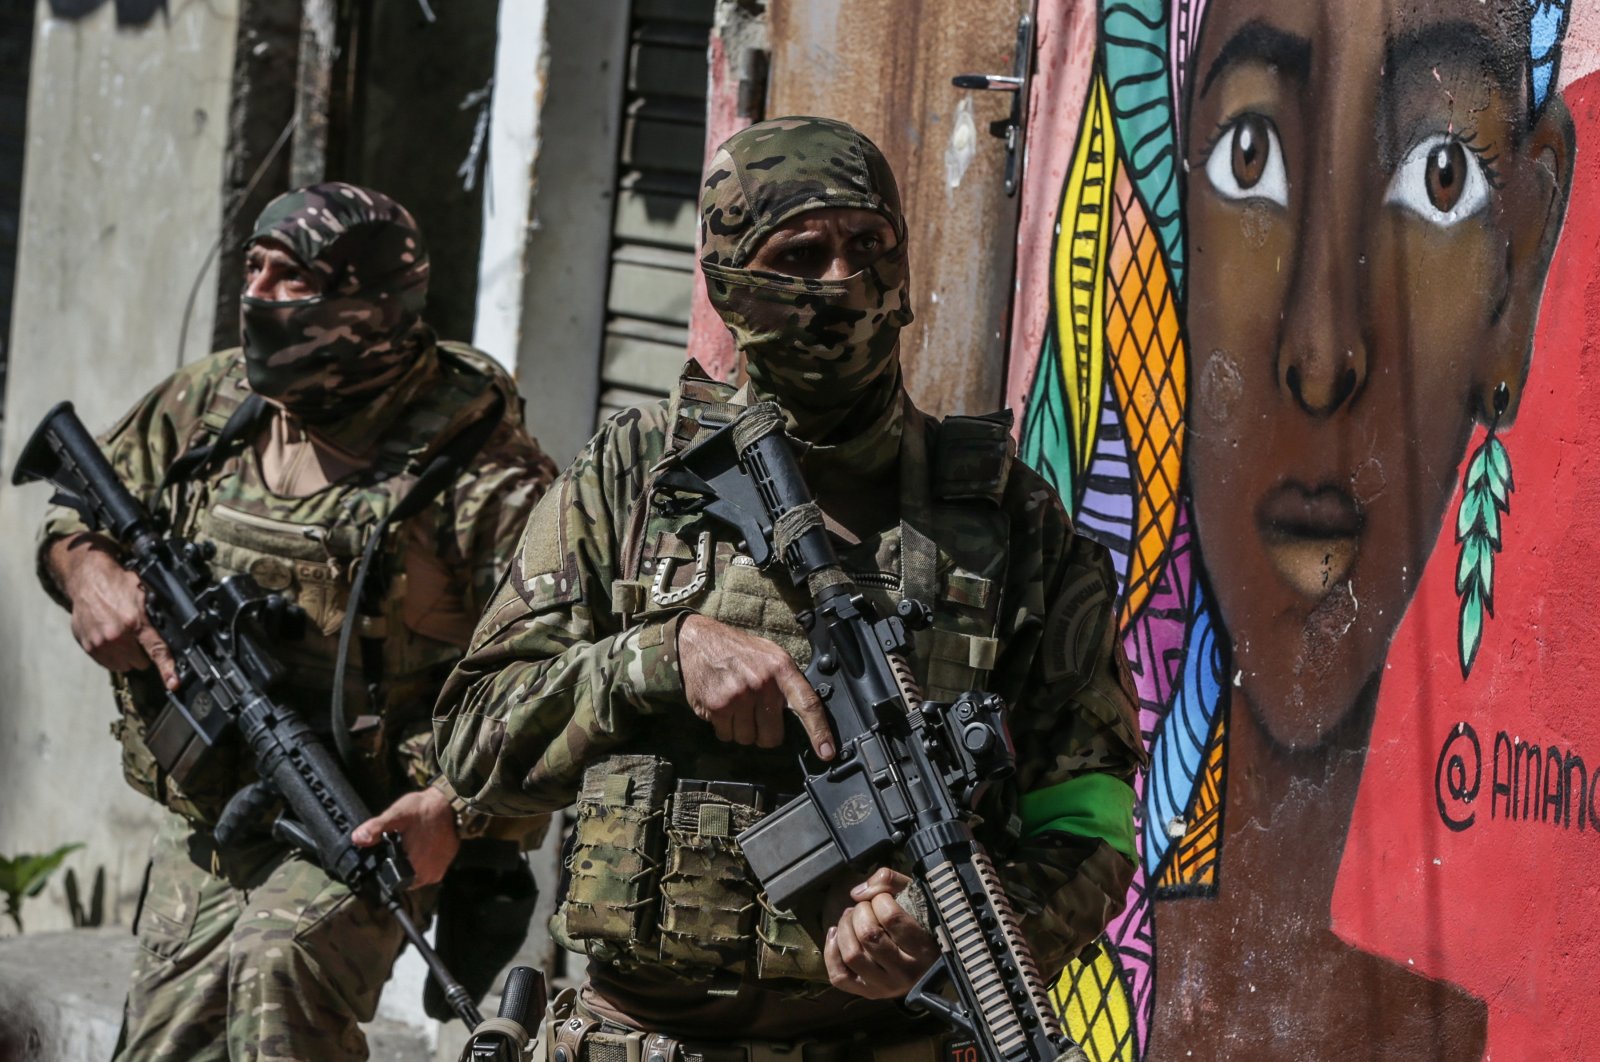 Members of the military police carry out an operation against organized crime, at the Alemao favela, north of Rio de Janeiro, Brazil, July 21, 2022. (EPA-EFE Photo)